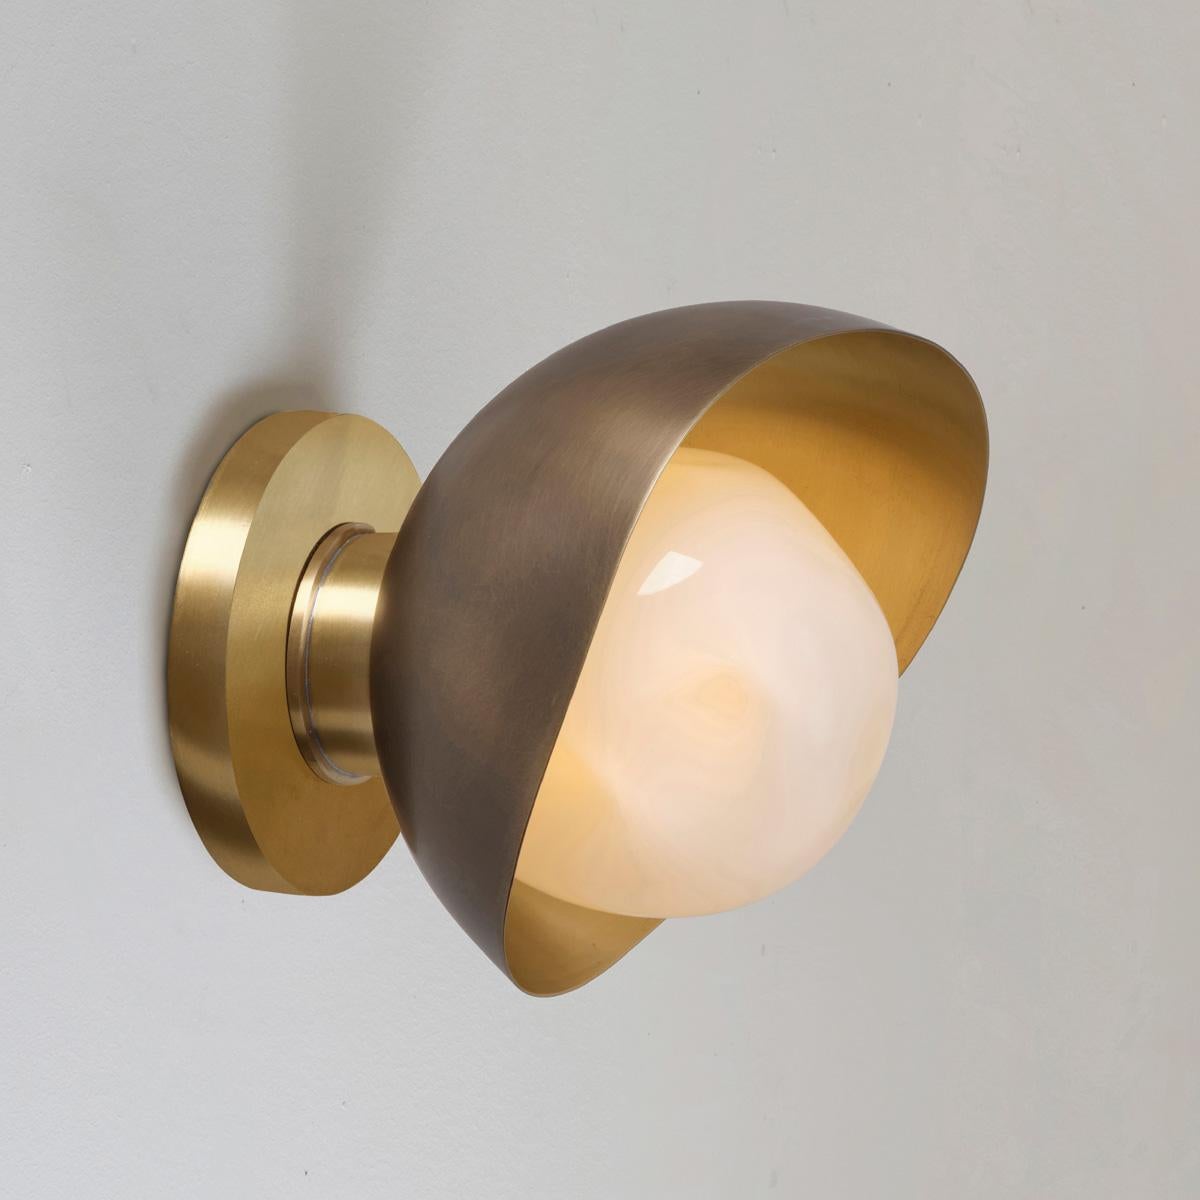 Modern Perla Mini Wall Light by Gaspare Asaro. Powder Pink and Satin Brass Finish For Sale